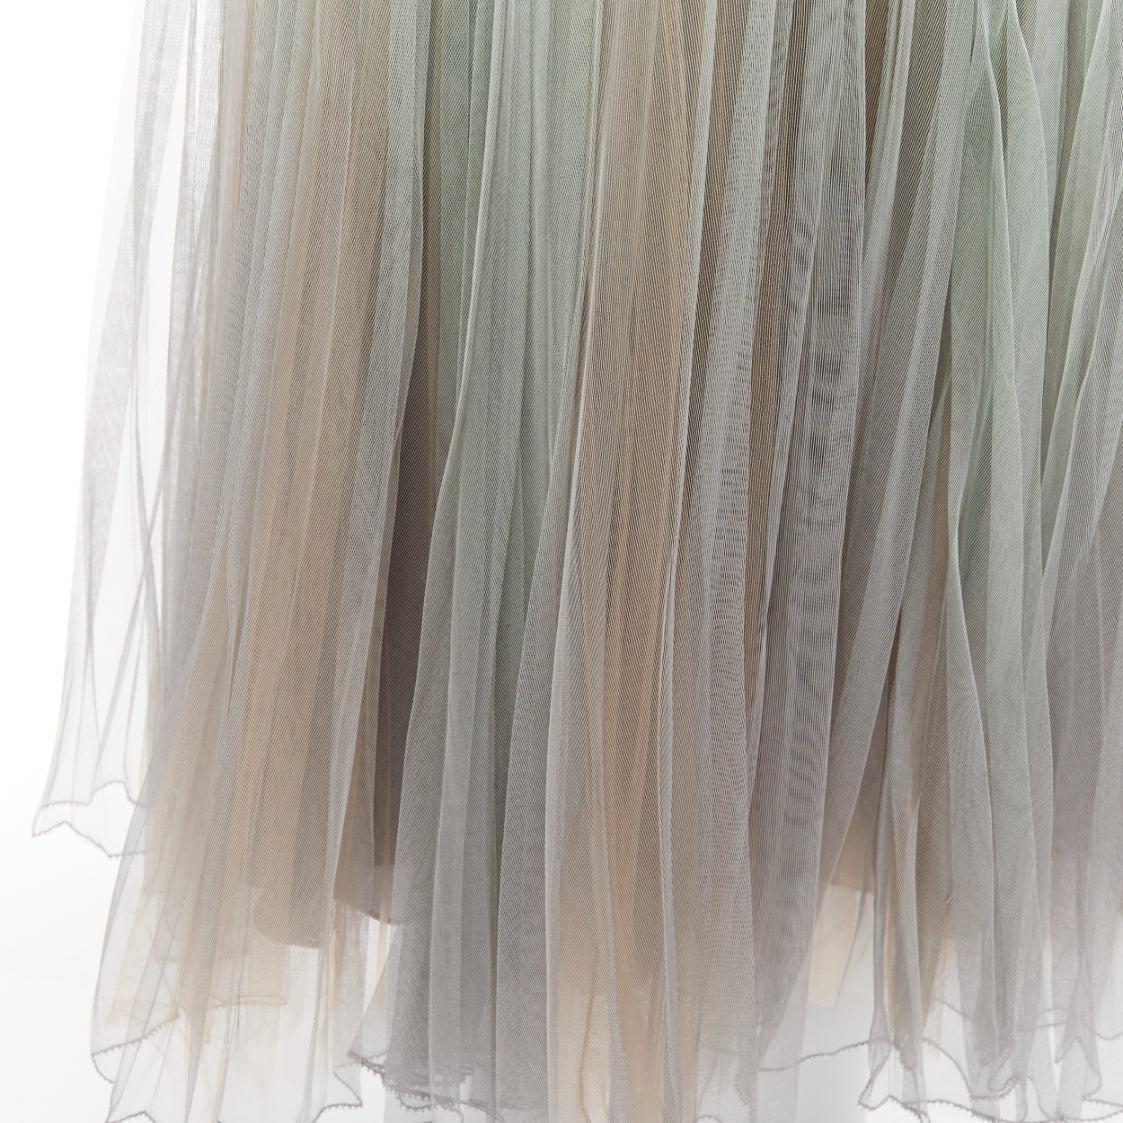 CHRISTIAN DIOR green nude pleated sheer tulle layered midi skirt FR36 S
Reference: AAWC/A00598
Brand: Christian Dior
Designer: Maria Grazia Chiuri
Material: Polyester
Color: Green, Nude
Pattern: Solid
Closure: Zip
Extra Details: Double layered tulle